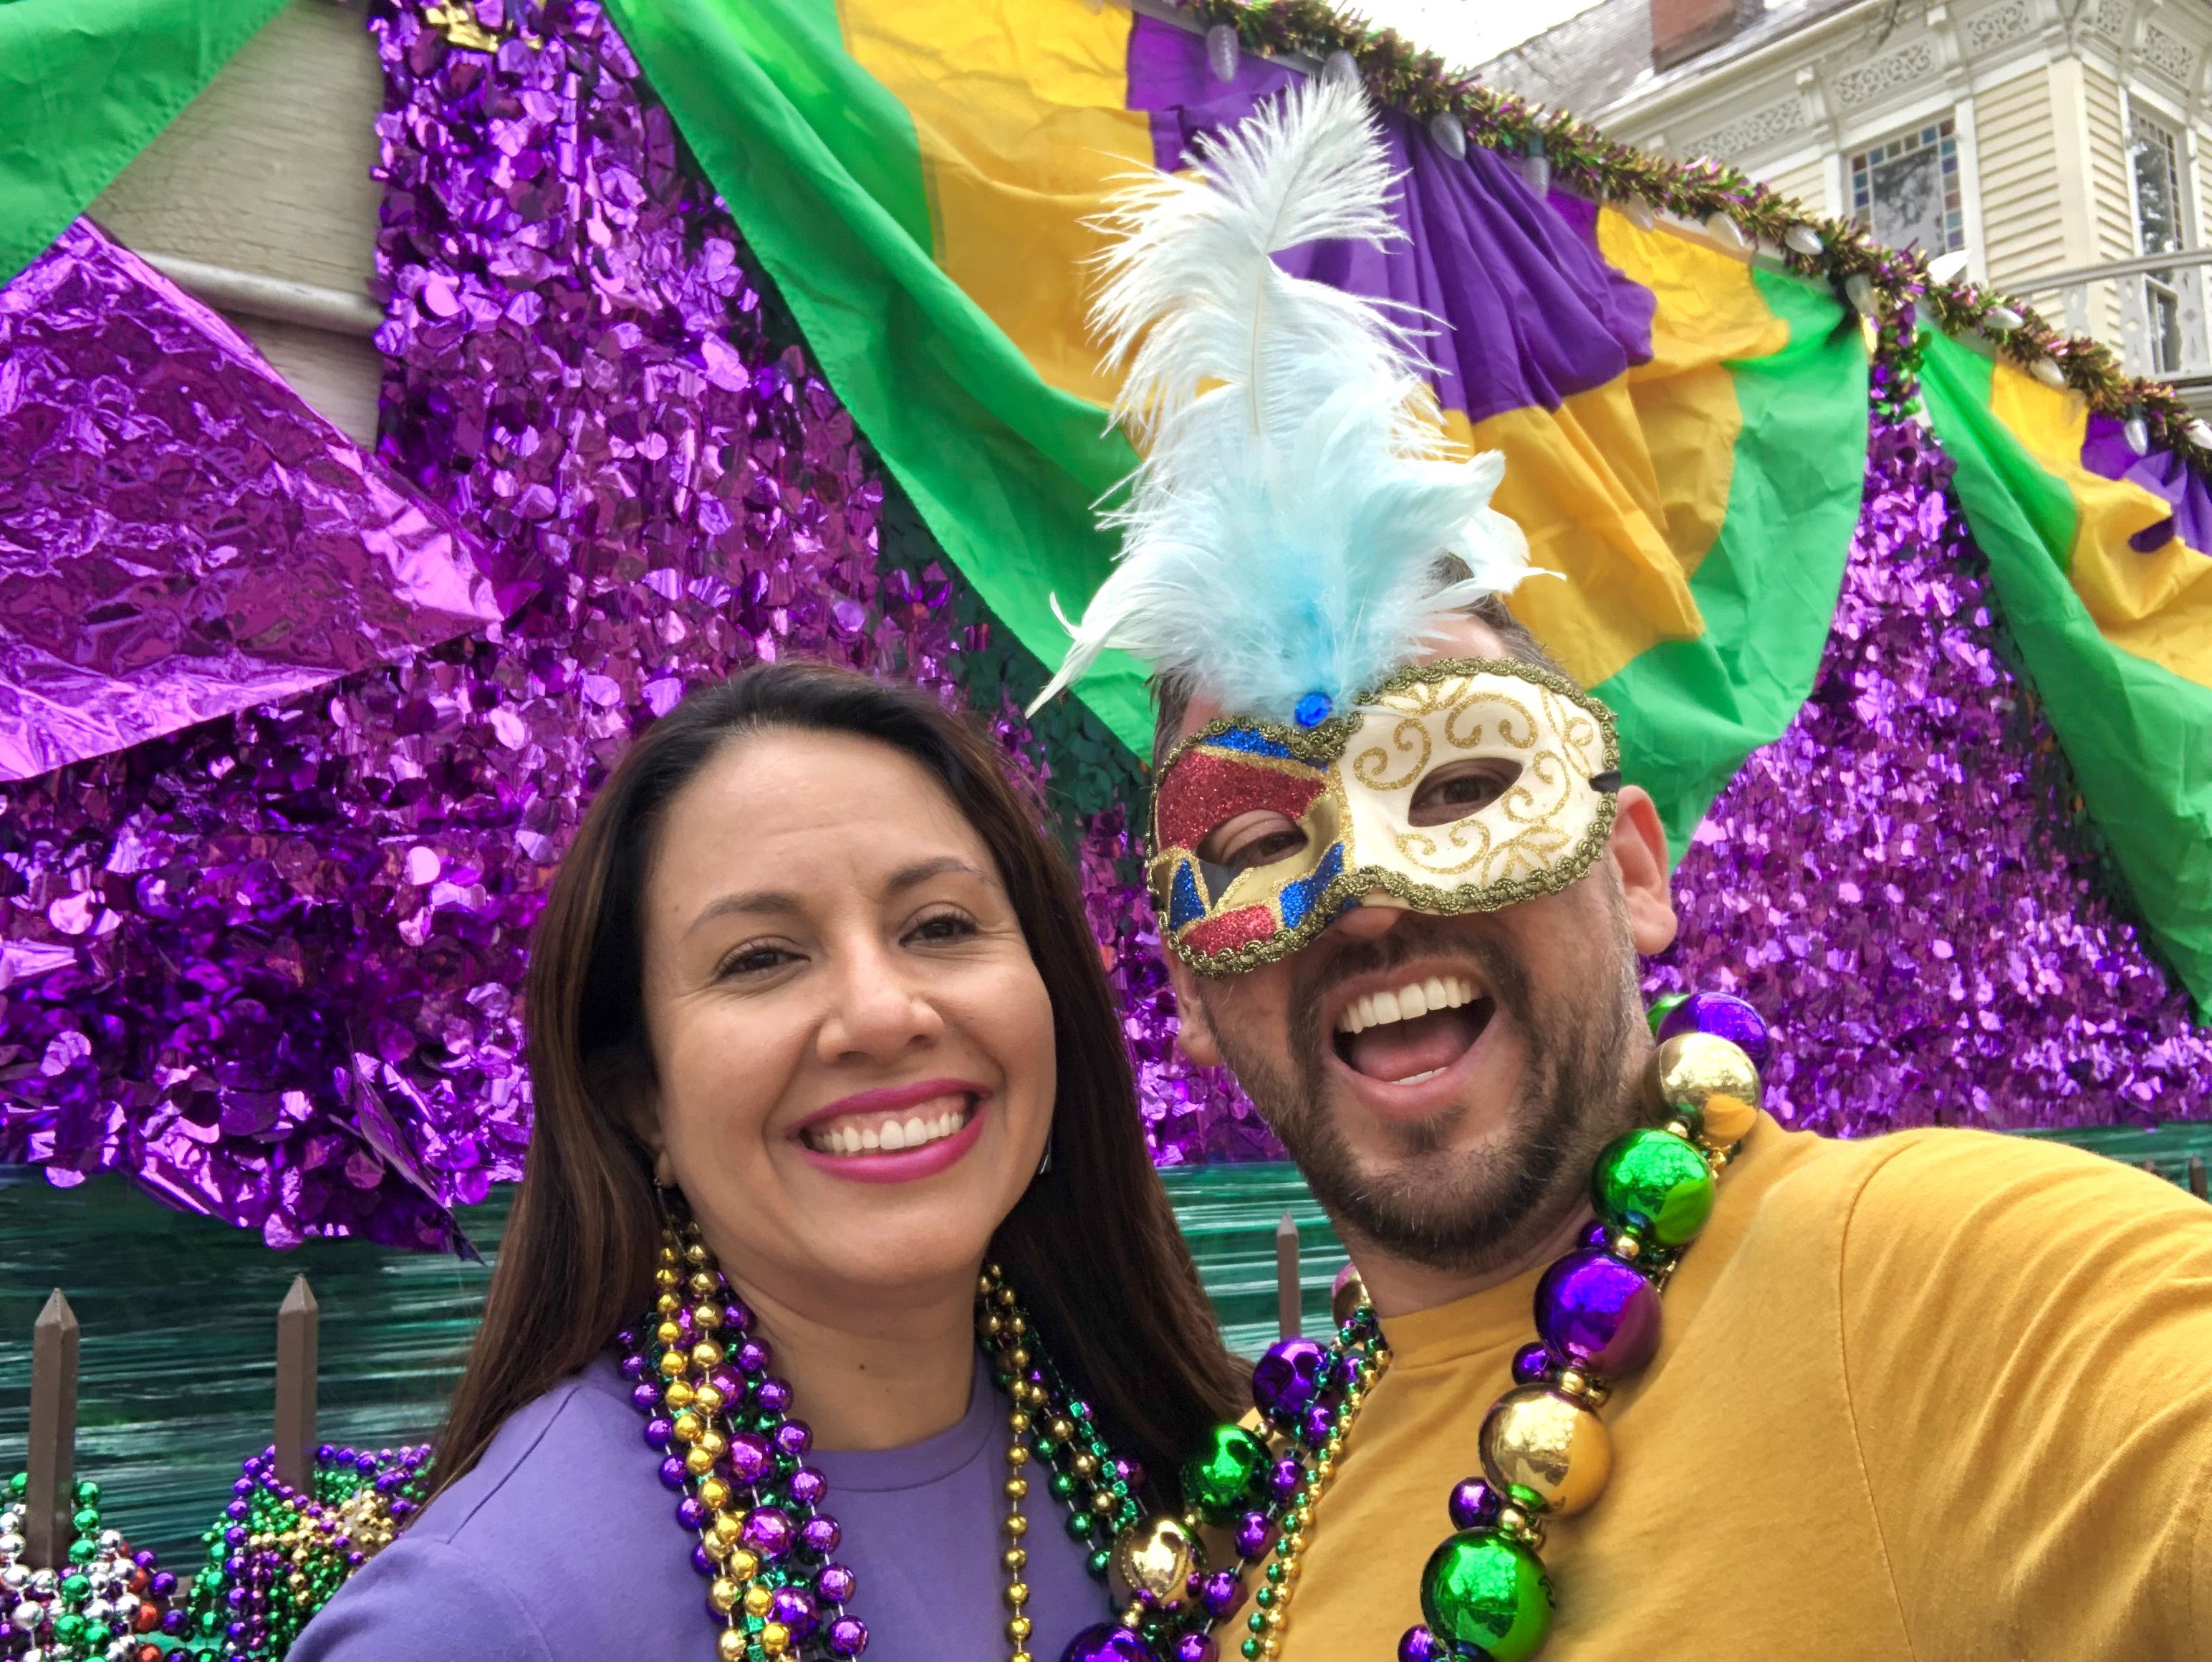 Got hundreds? That's how much Mardi Gras beads can set you back